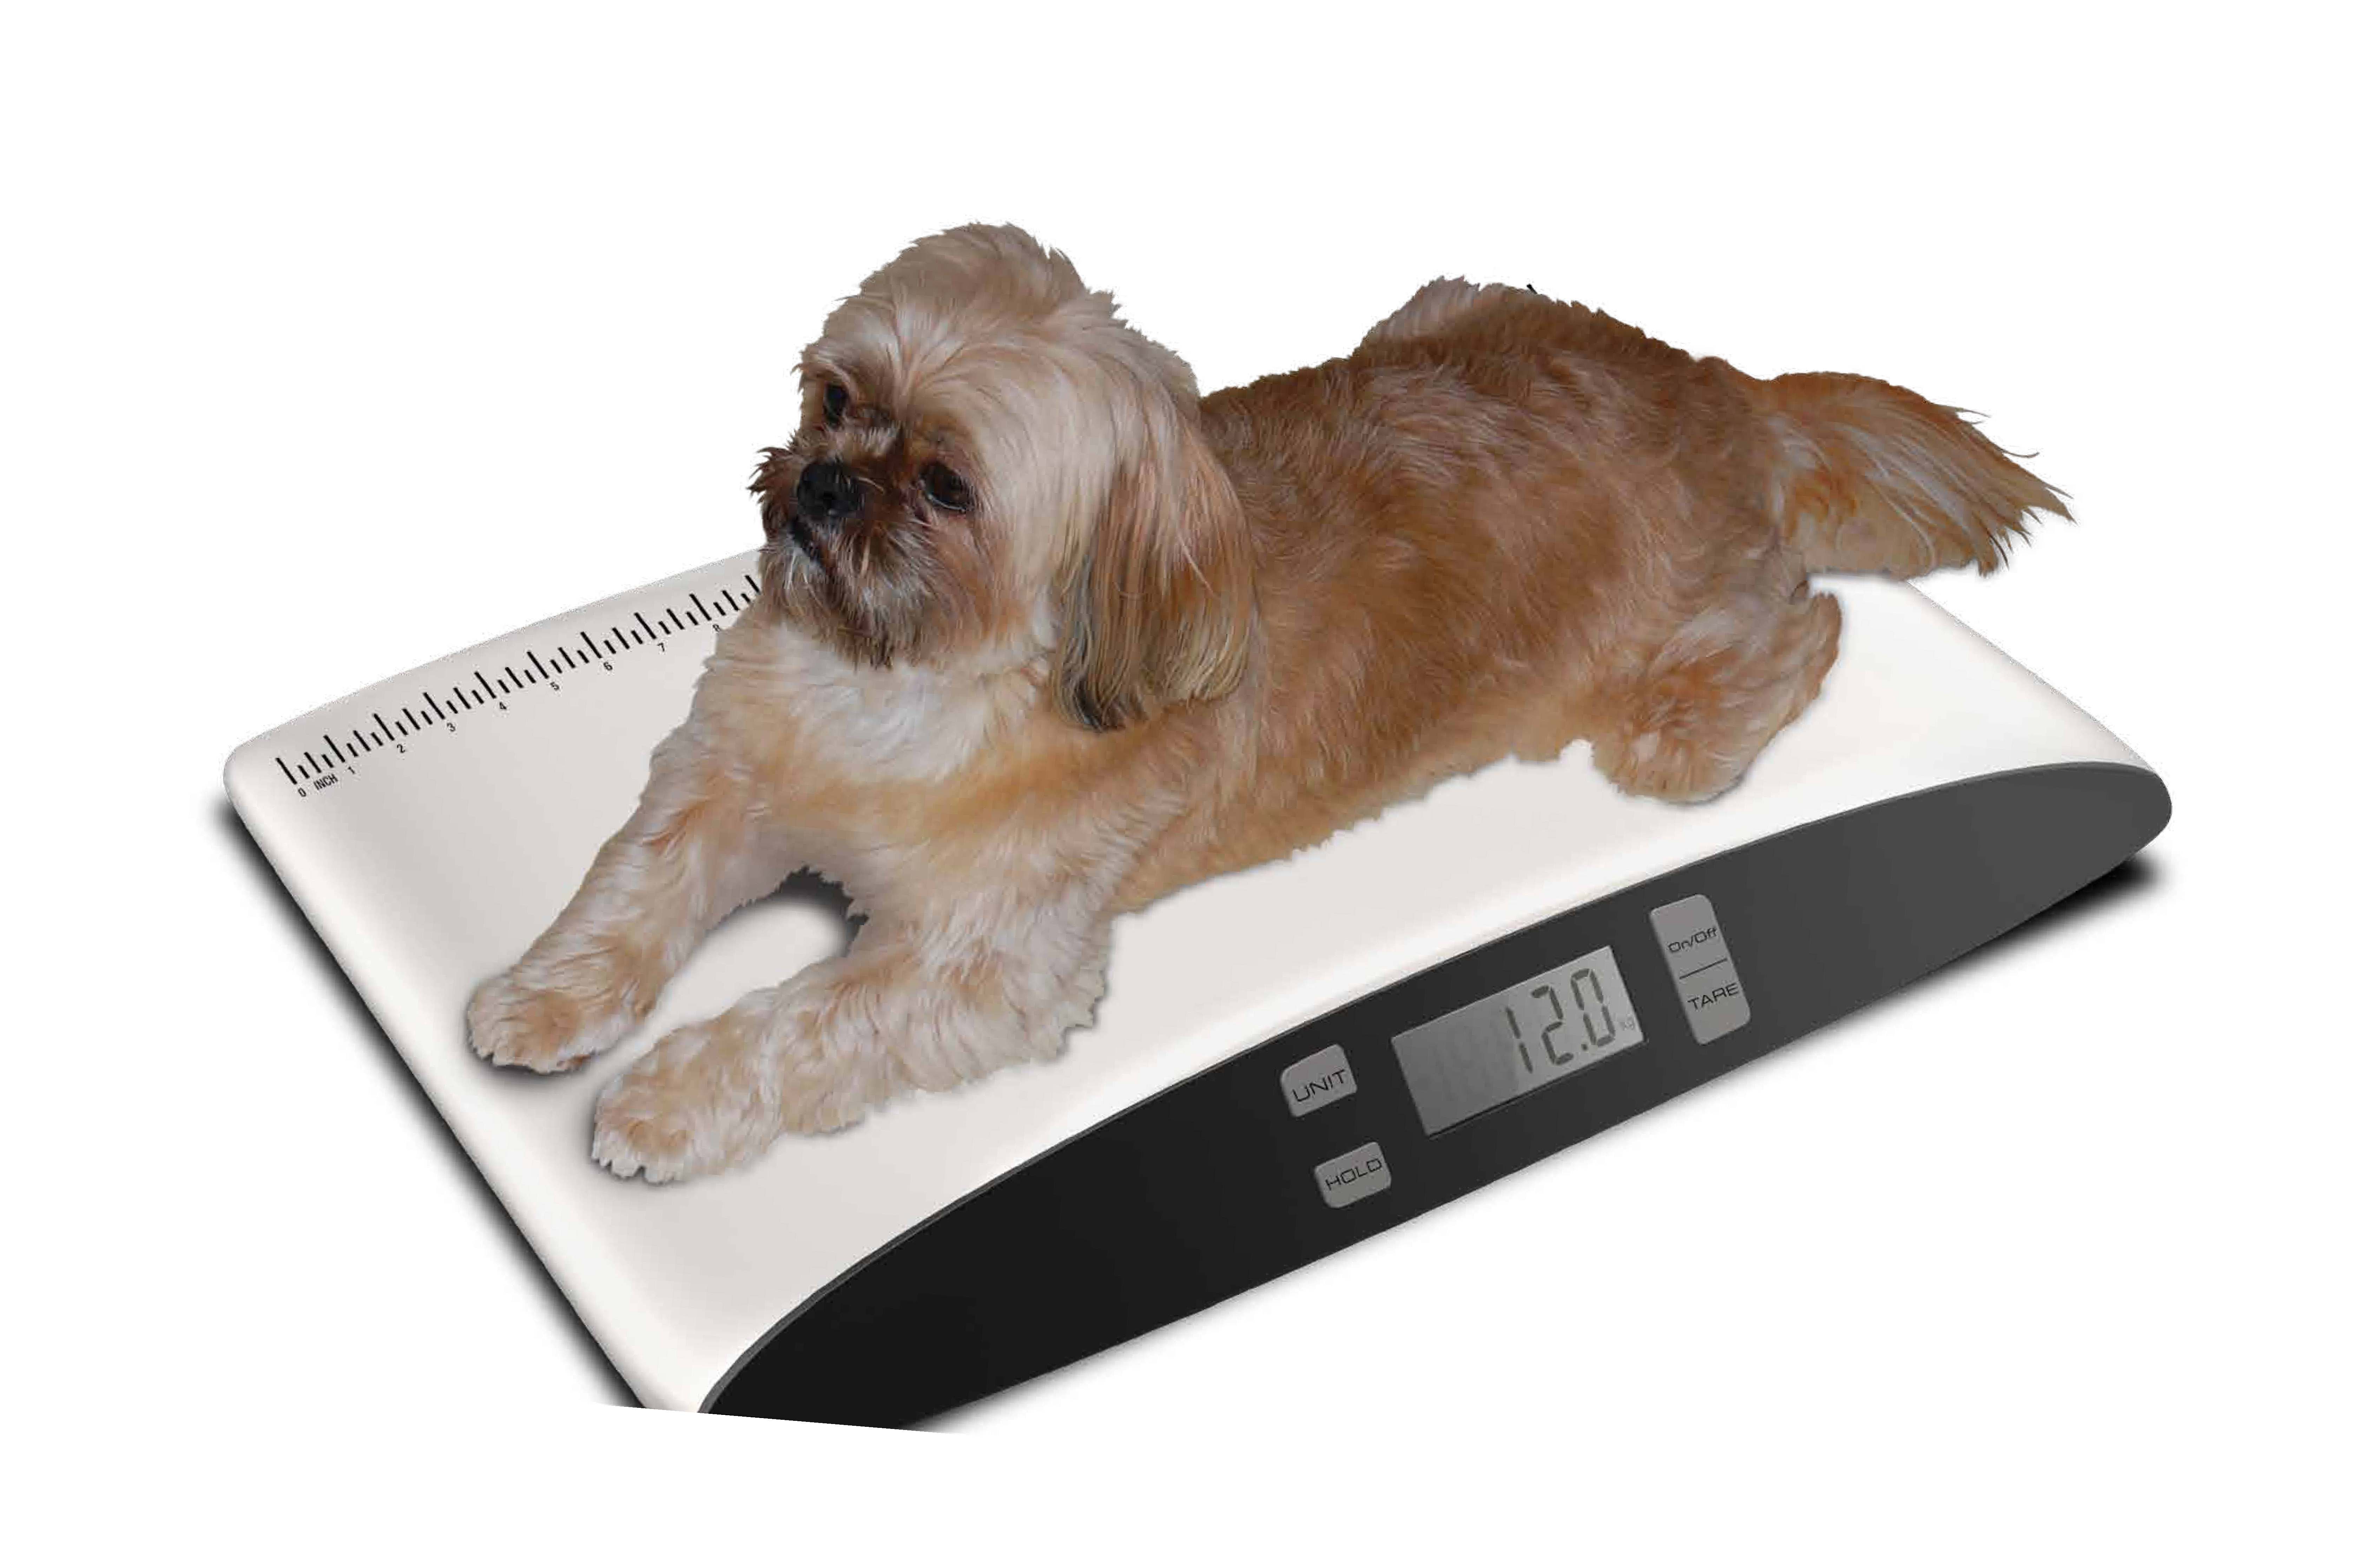 https://www.sabipets.com/wp-content/uploads/2018/07/7455-Small-Digital-Pet-Scale-with-Dog.jpg